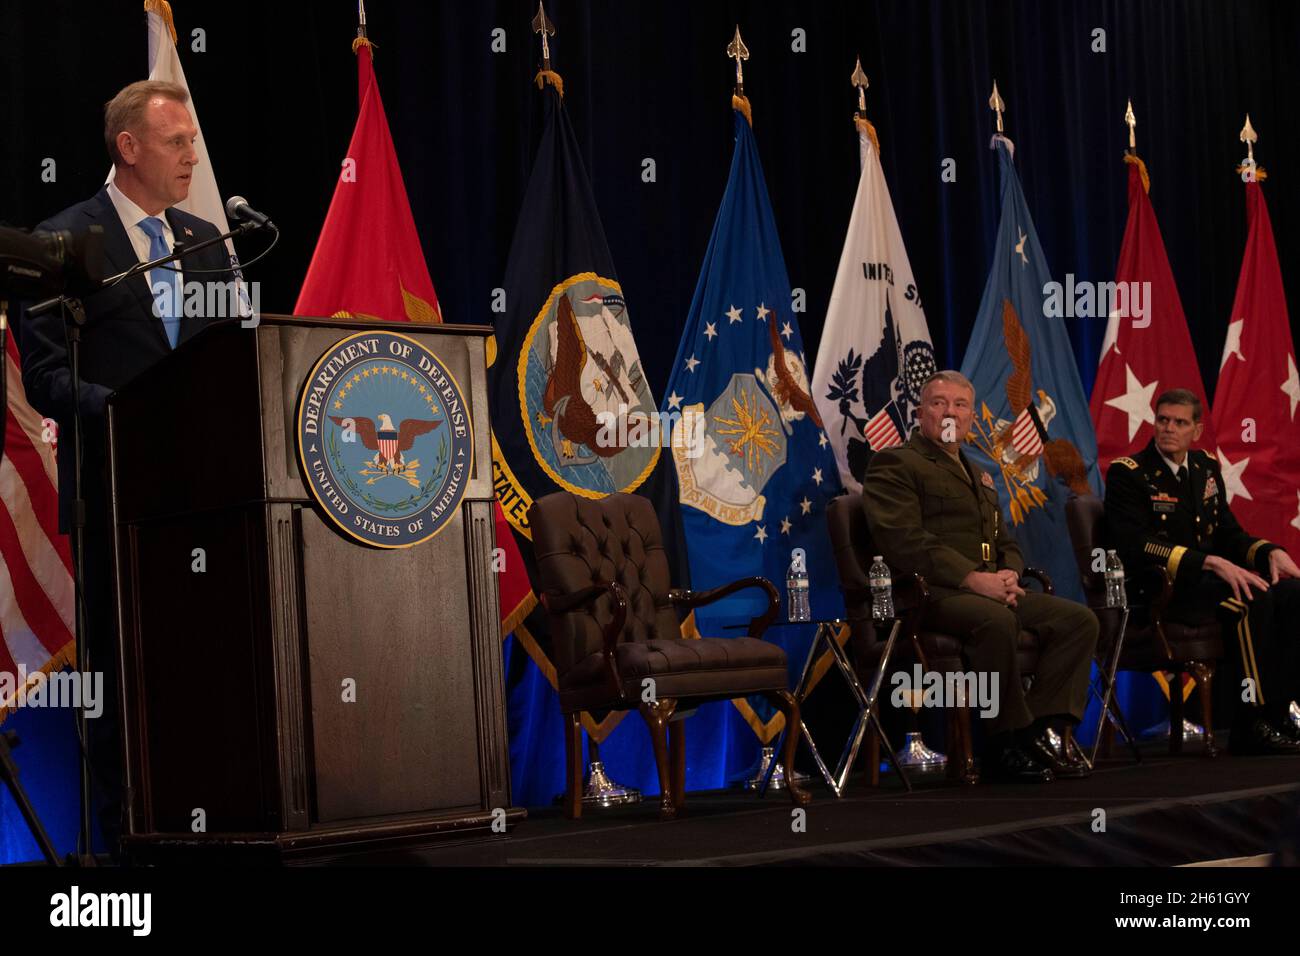 Reportage:   U.S. Acting Secretary of Defense Patrick M. Shanahan speaks at the U.S. Central Command change of command, Tampa, Florida, March 28, 2019. Seated are (center) the incoming commander of U.S. Central Command, U.S. Marine Corps Gen. Kenneth F. McKenzie Jr., and the outgoing Centcom commander, U.S. Army Gen. Joseph L. Votel. Stock Photo